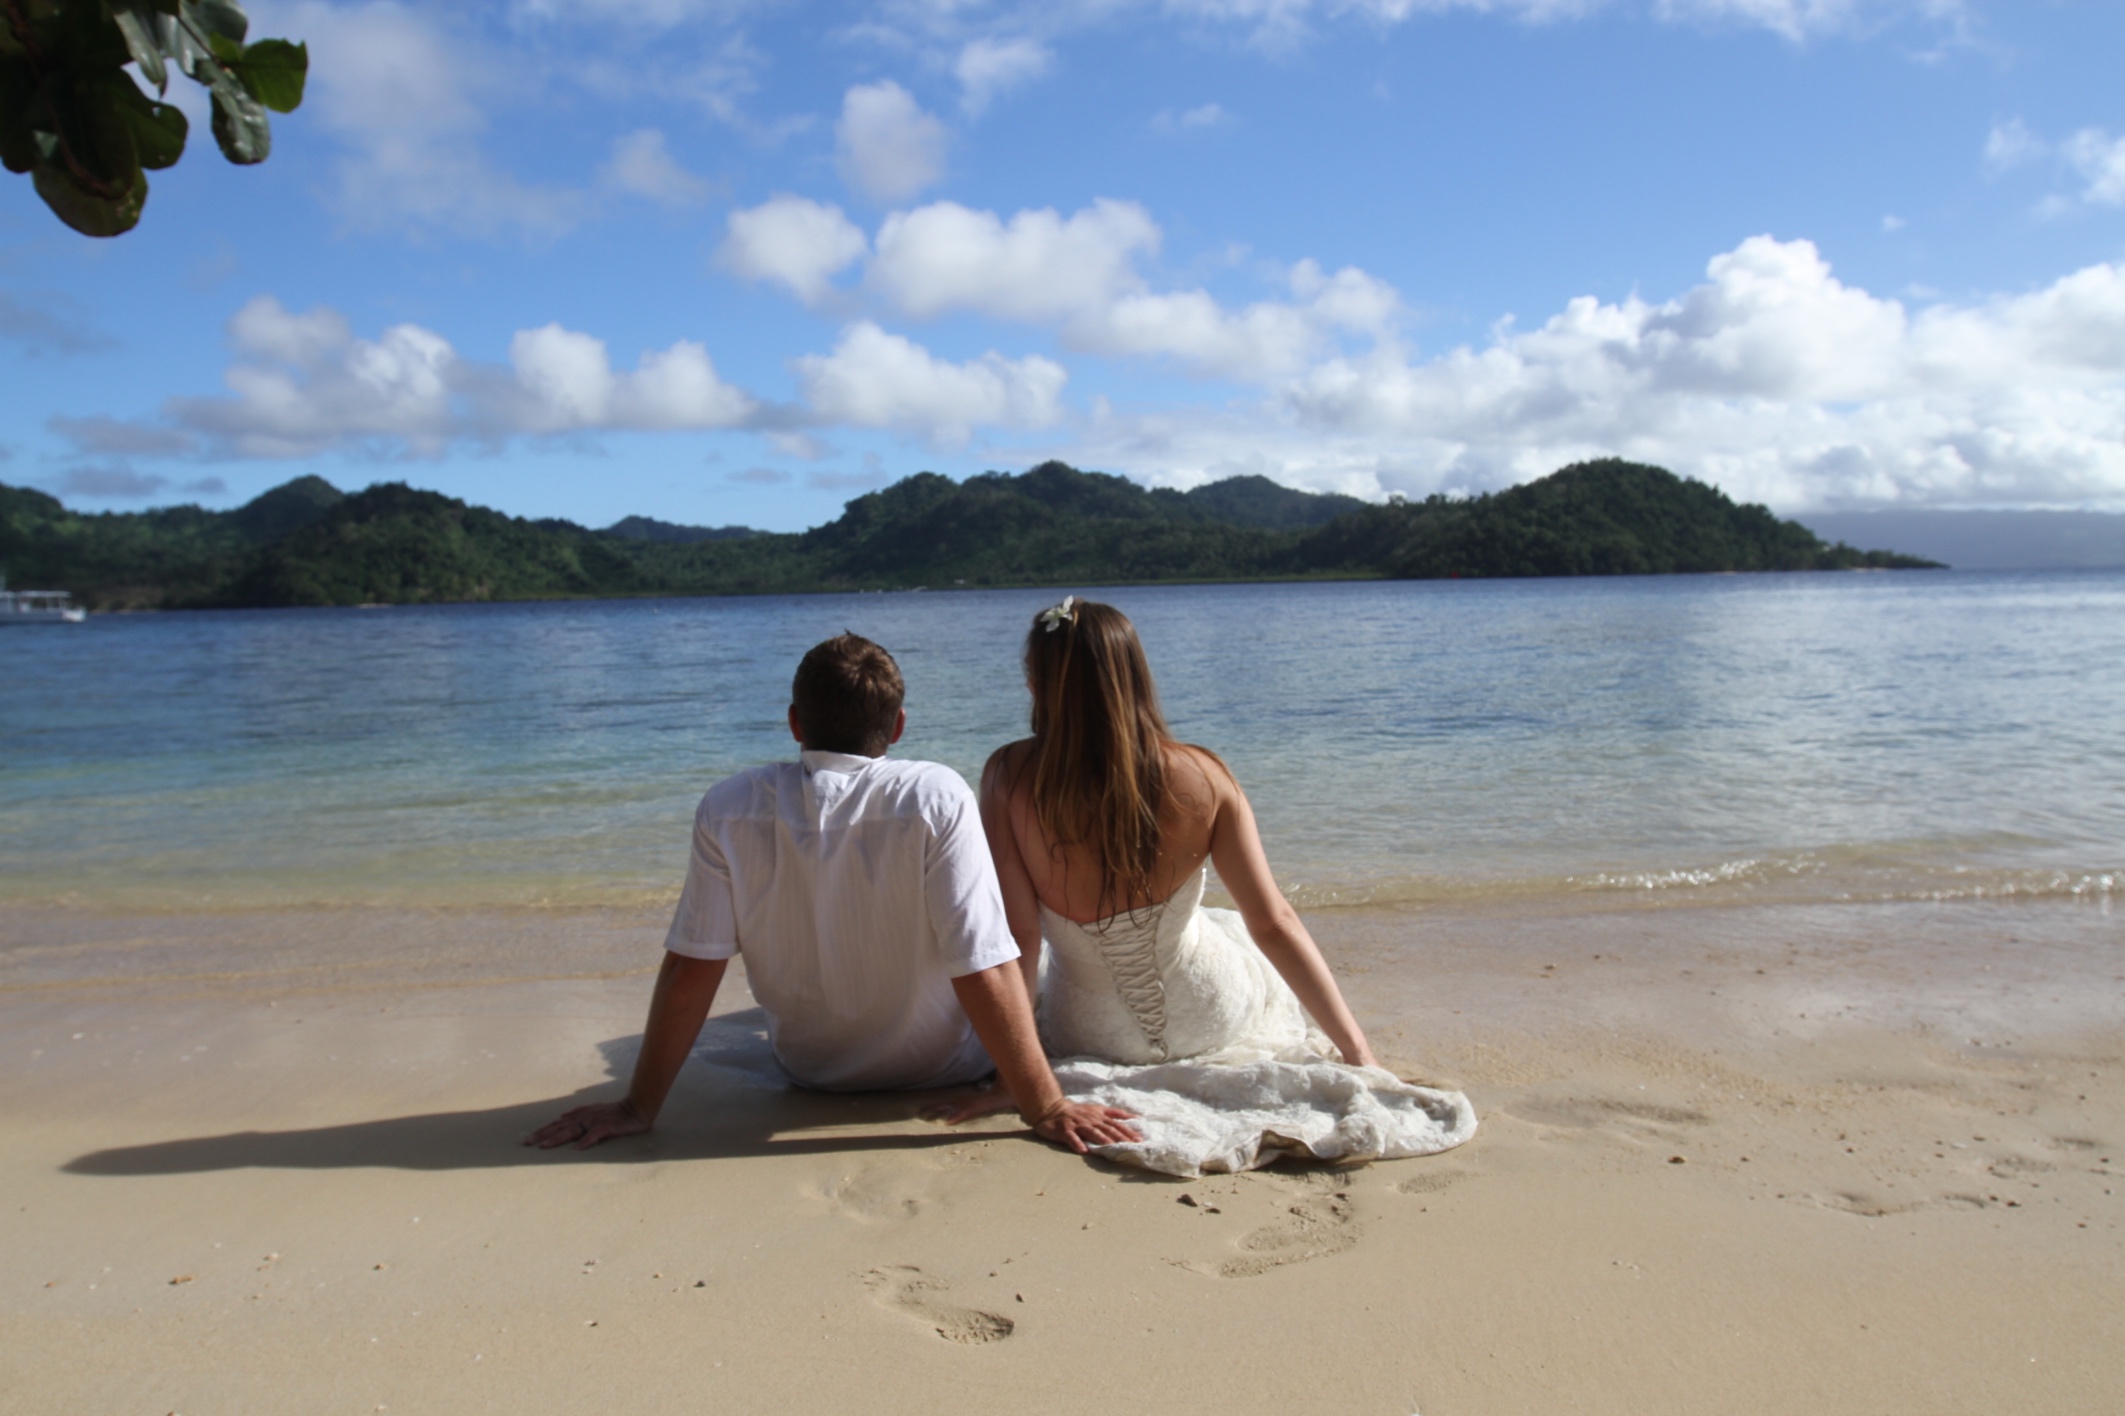 An eloping couple sitting together on a beach.